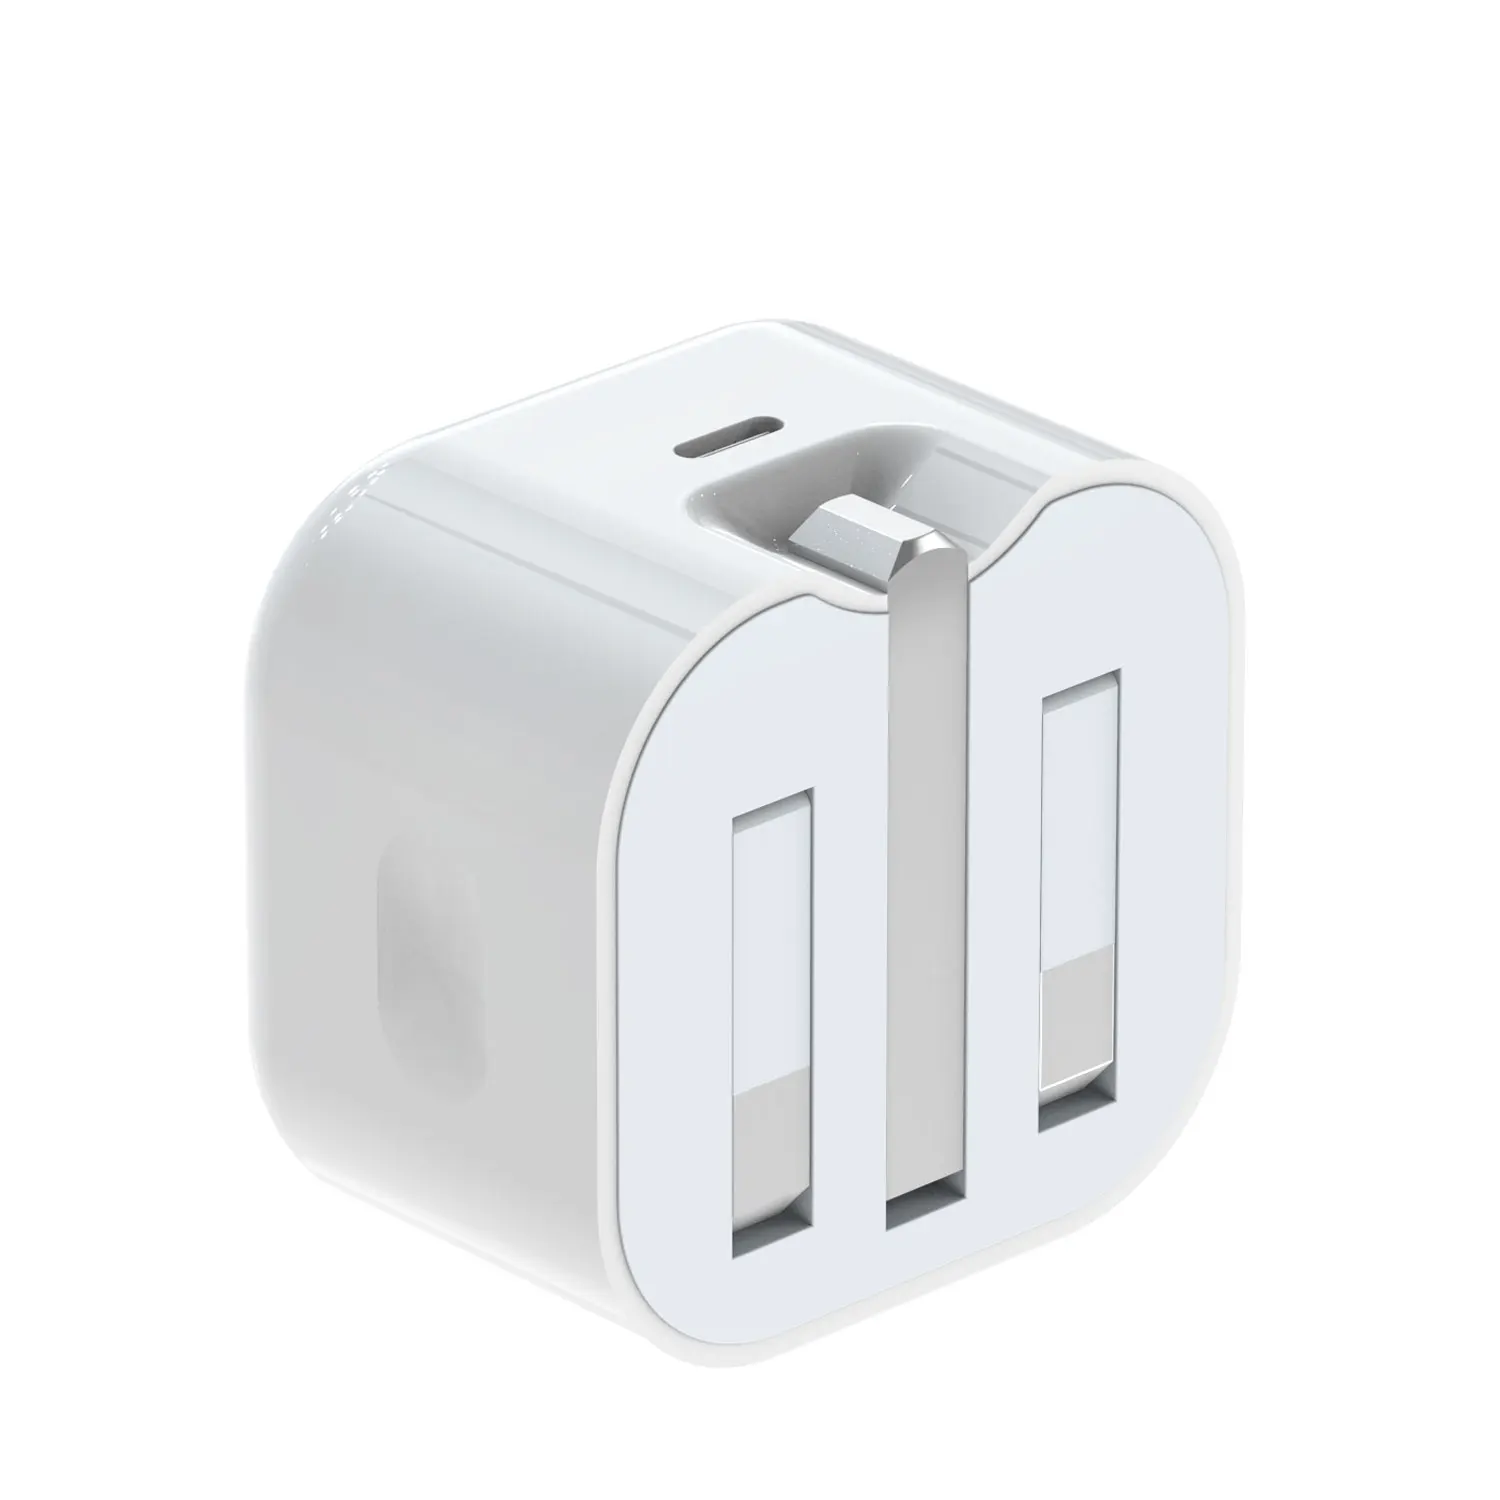 

Hot Sales Folded UK plug adaper usb cargadores celulares 18w wall quick charger adapter type c for iphone 12, White